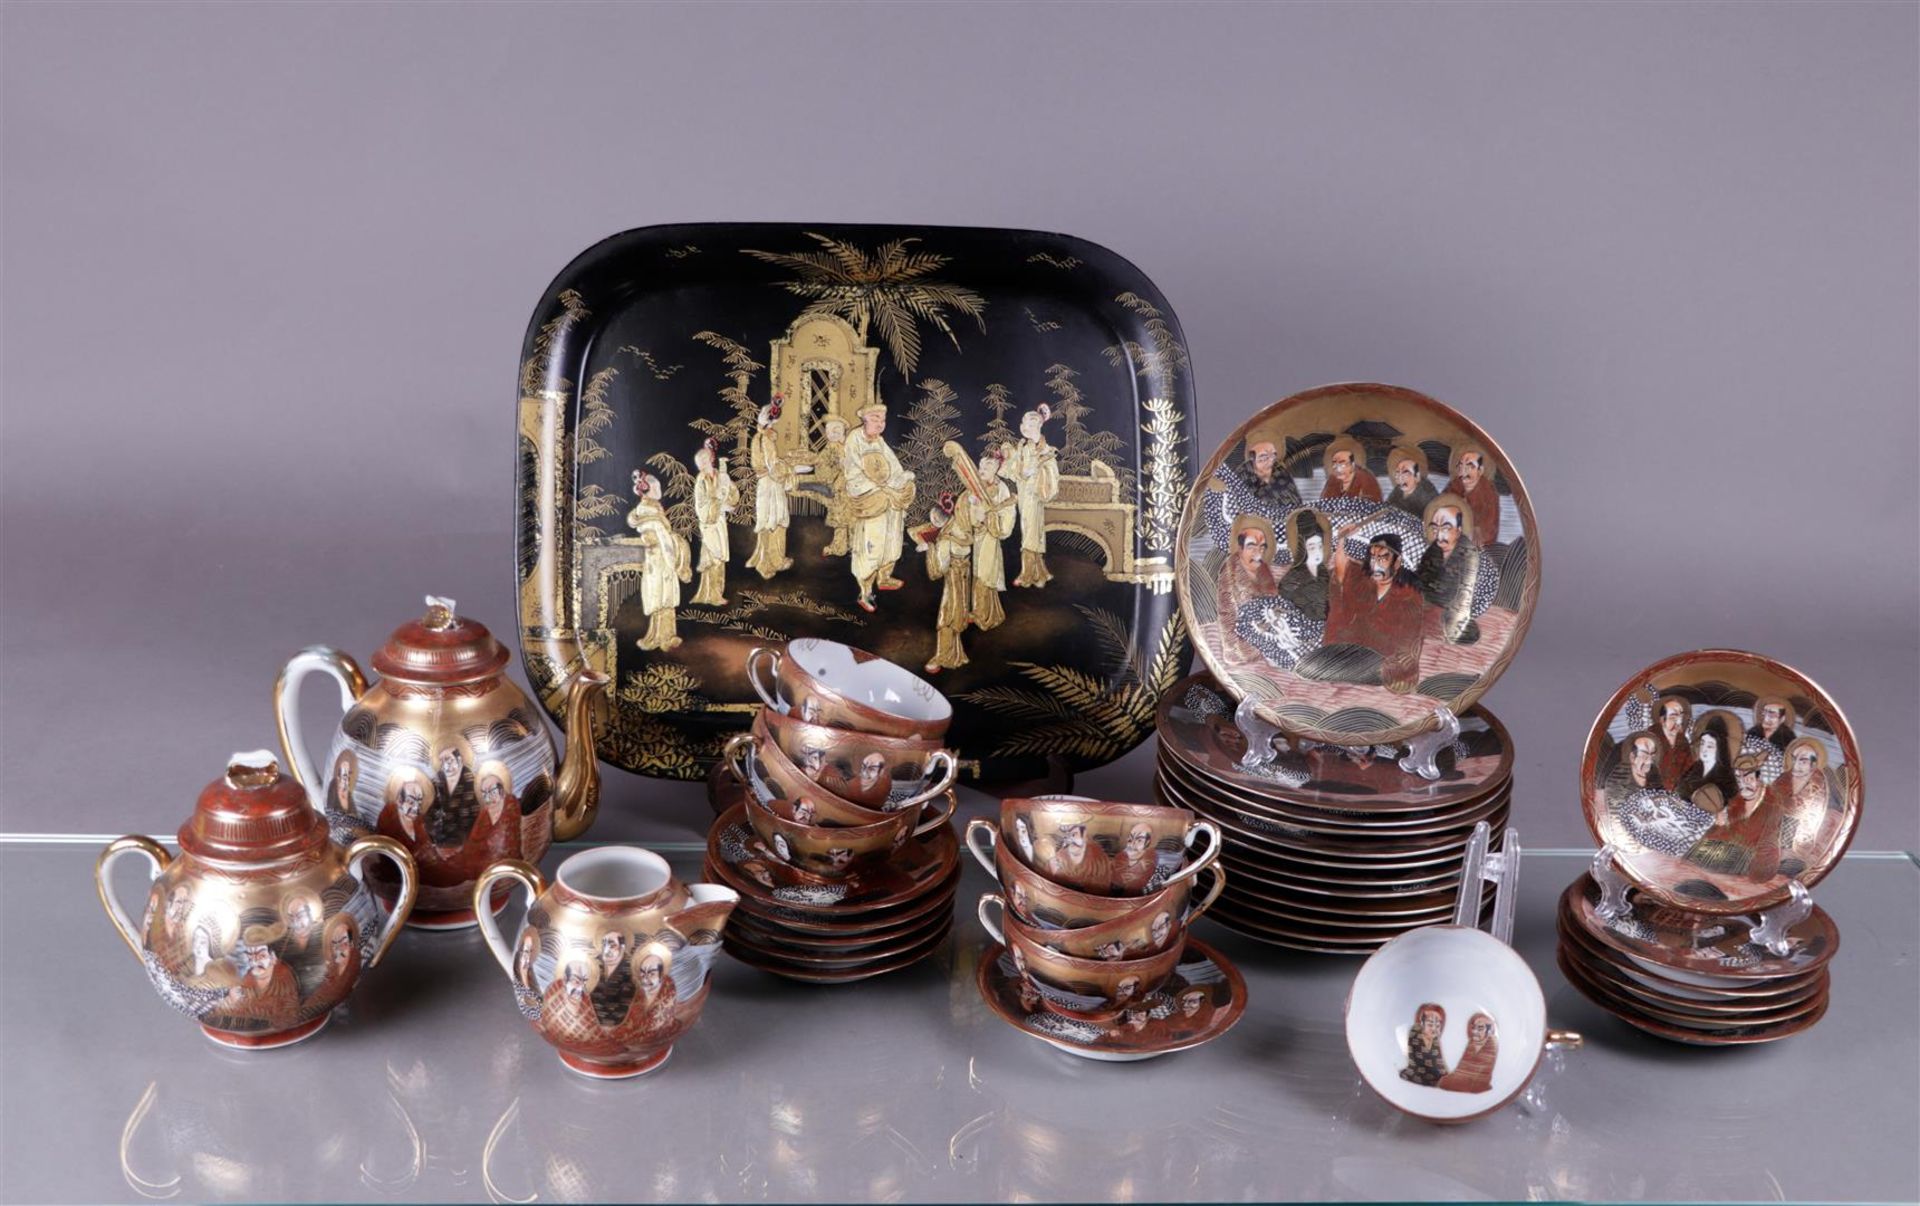 A Satsuma tea set with breakfast plates, plus a tray decorated with various figures. Japan, 19th cen